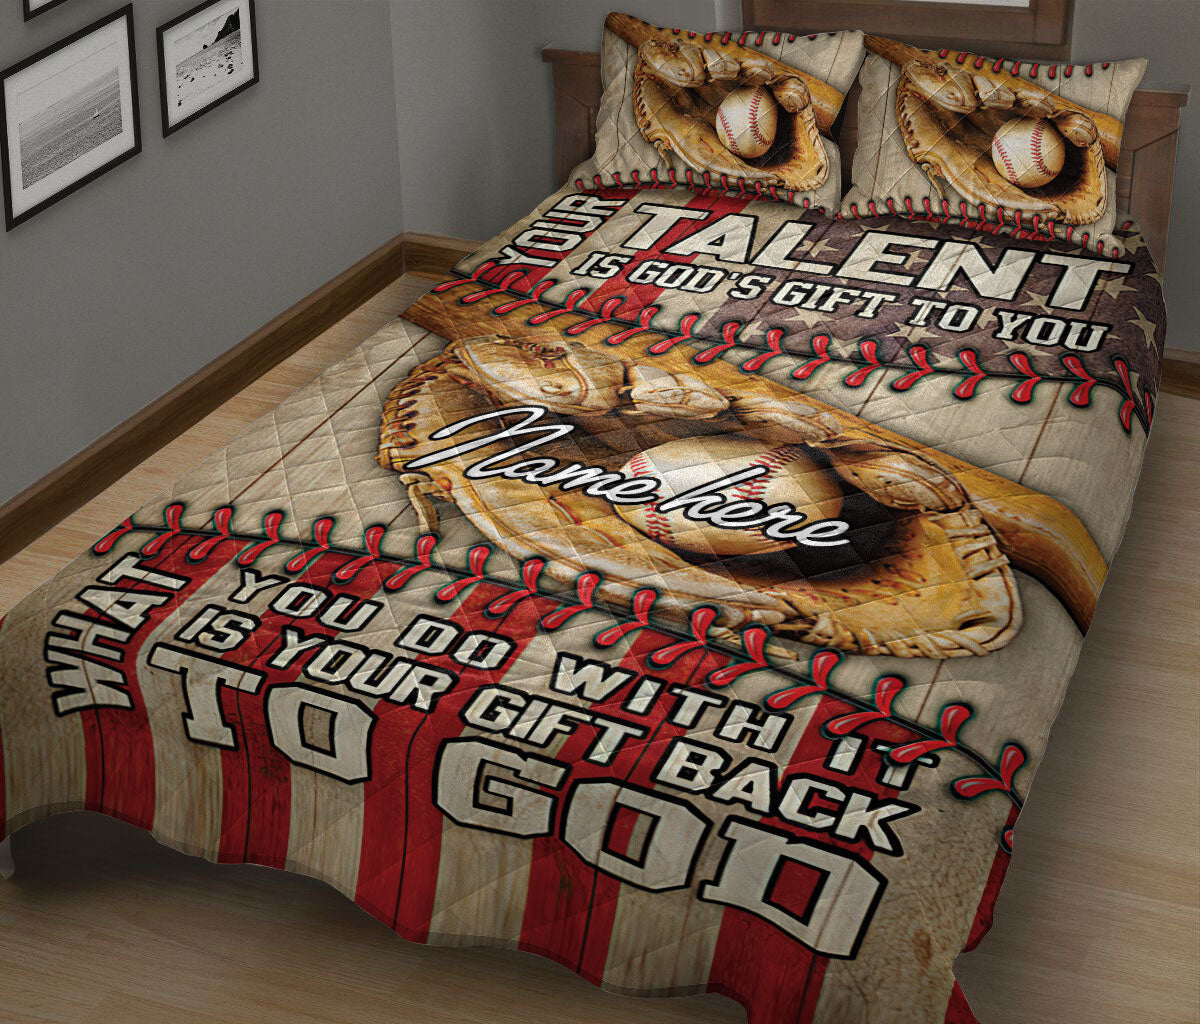 Ohaprints-Quilt-Bed-Set-Pillowcase-Your-Talent-Baseball-Lover-Gift-Ball-Glove-Vintage-Custom-Personalized-Name-Blanket-Bedspread-Bedding-2011-King (90'' x 100'')